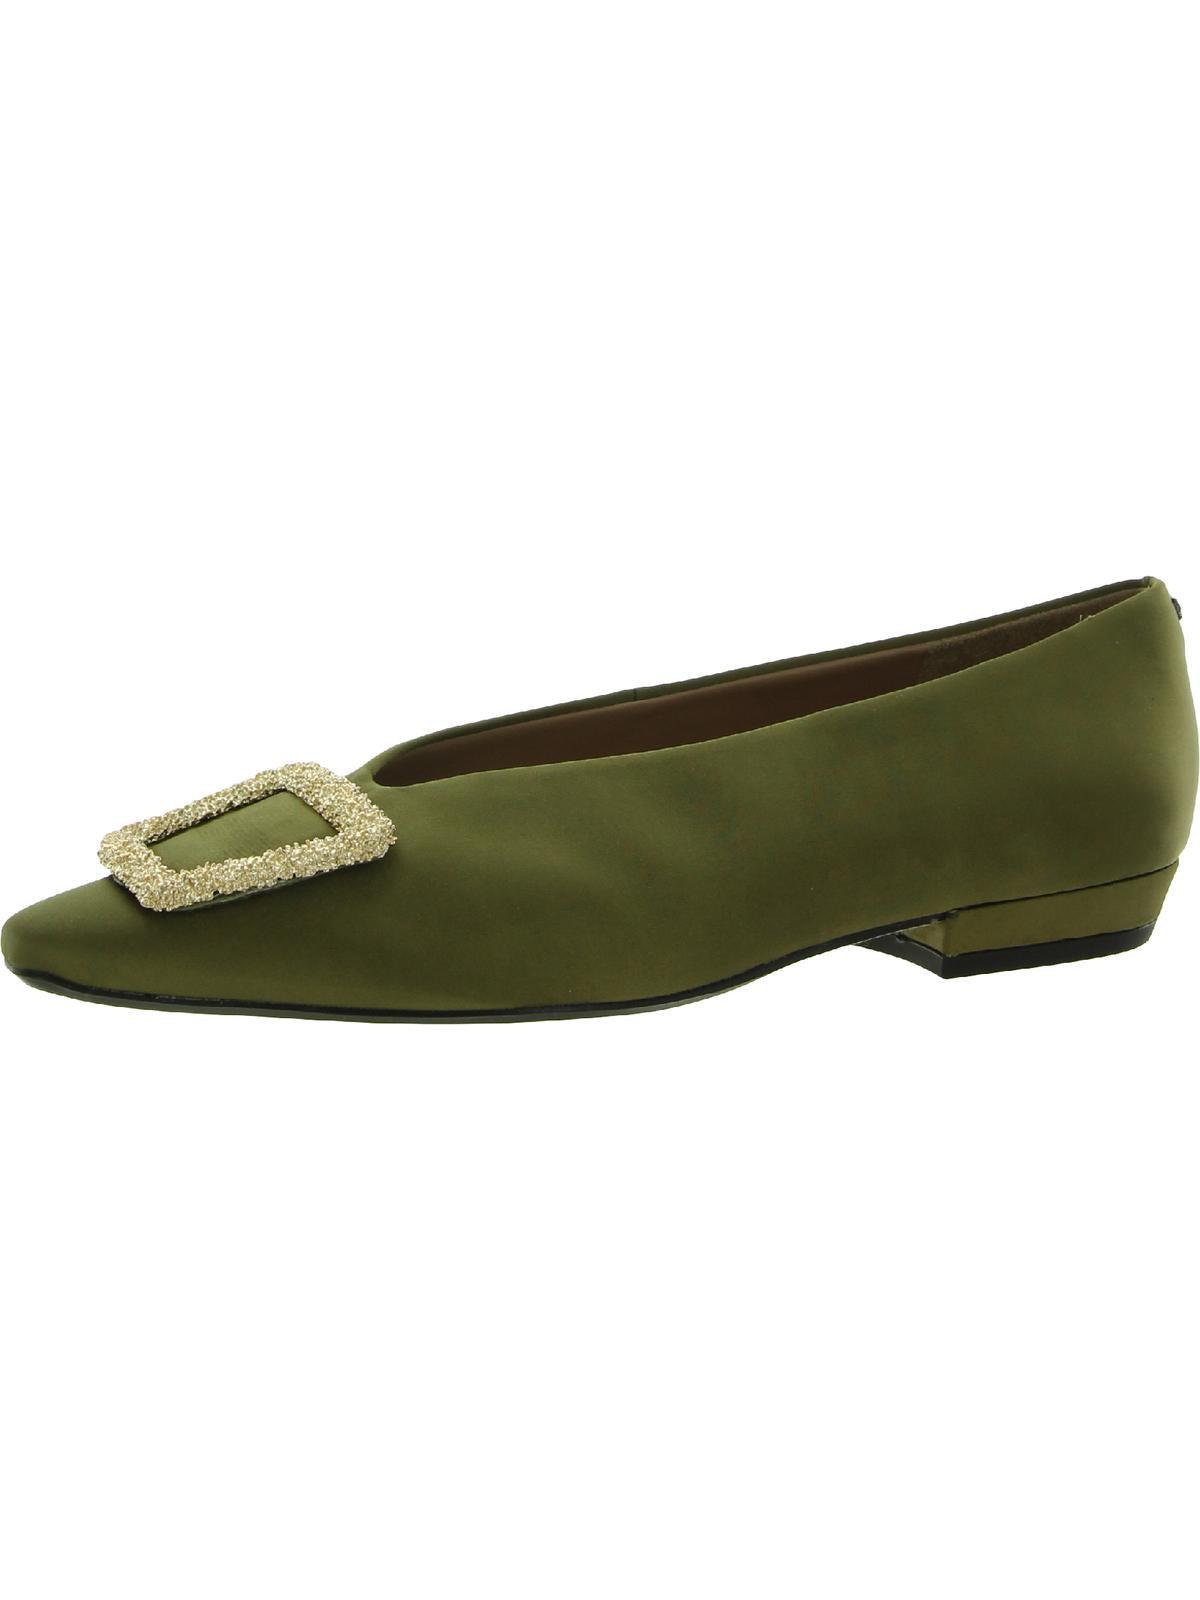 Sam Edelman Janina Embellished Flats Shoes in Green | Lyst